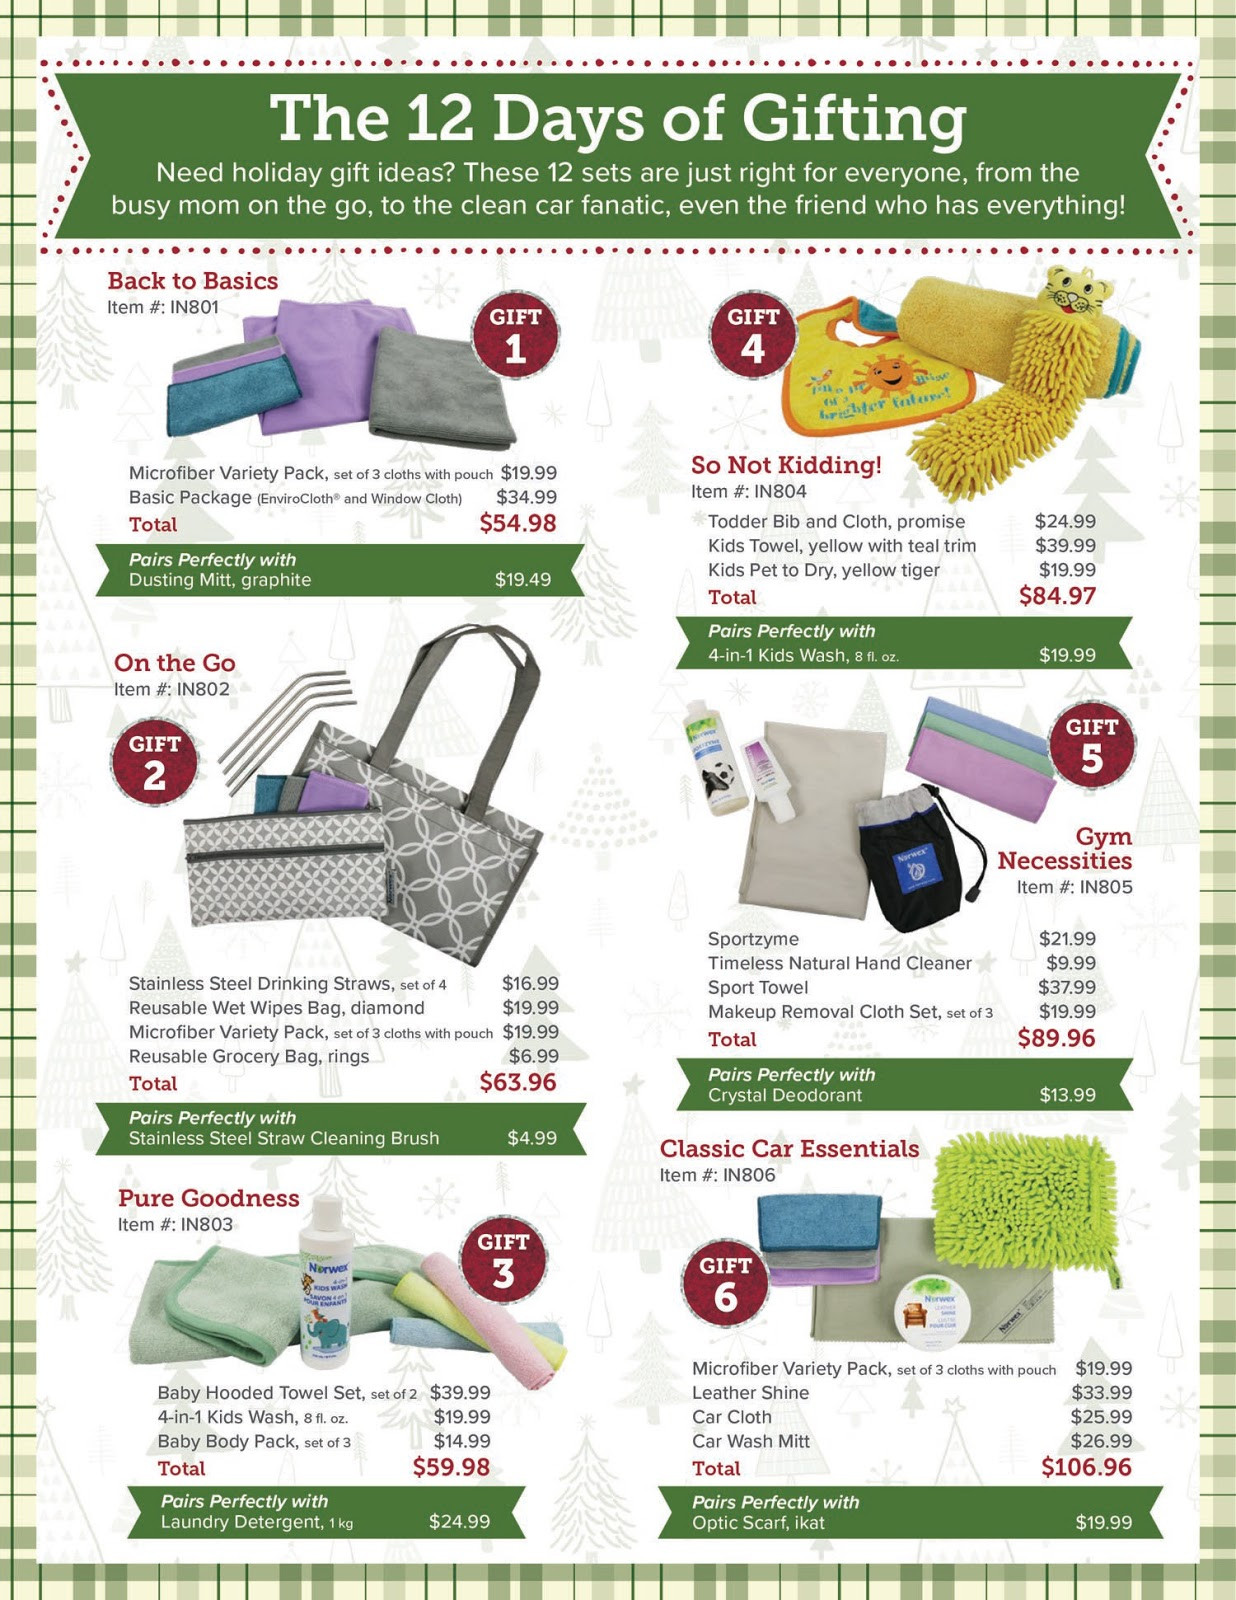 Norwex Holiday Gift Ideas
 Rebecca Lange Norwex Independent Sales Consultant